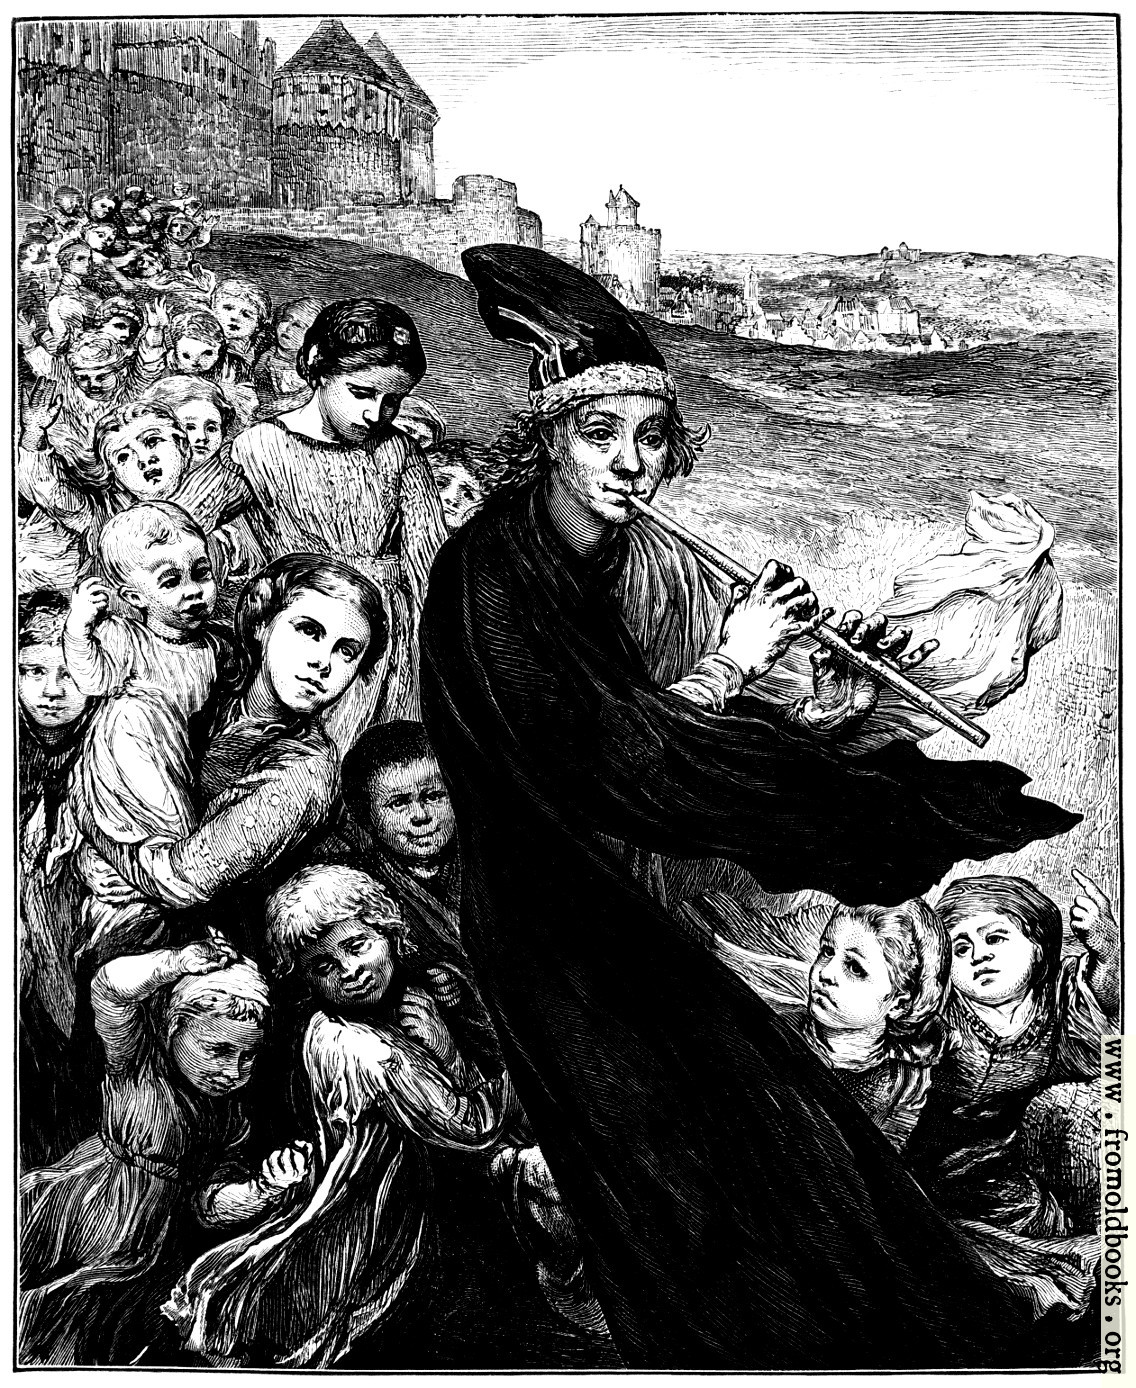 http://www.fromoldbooks.org/Scudder-DoingsOfTheBodleyFamily/pages/083-the-pied-piper-of-hamelin/083-the-pied-piper-of-hamelin-q90-1136x1388.jpg